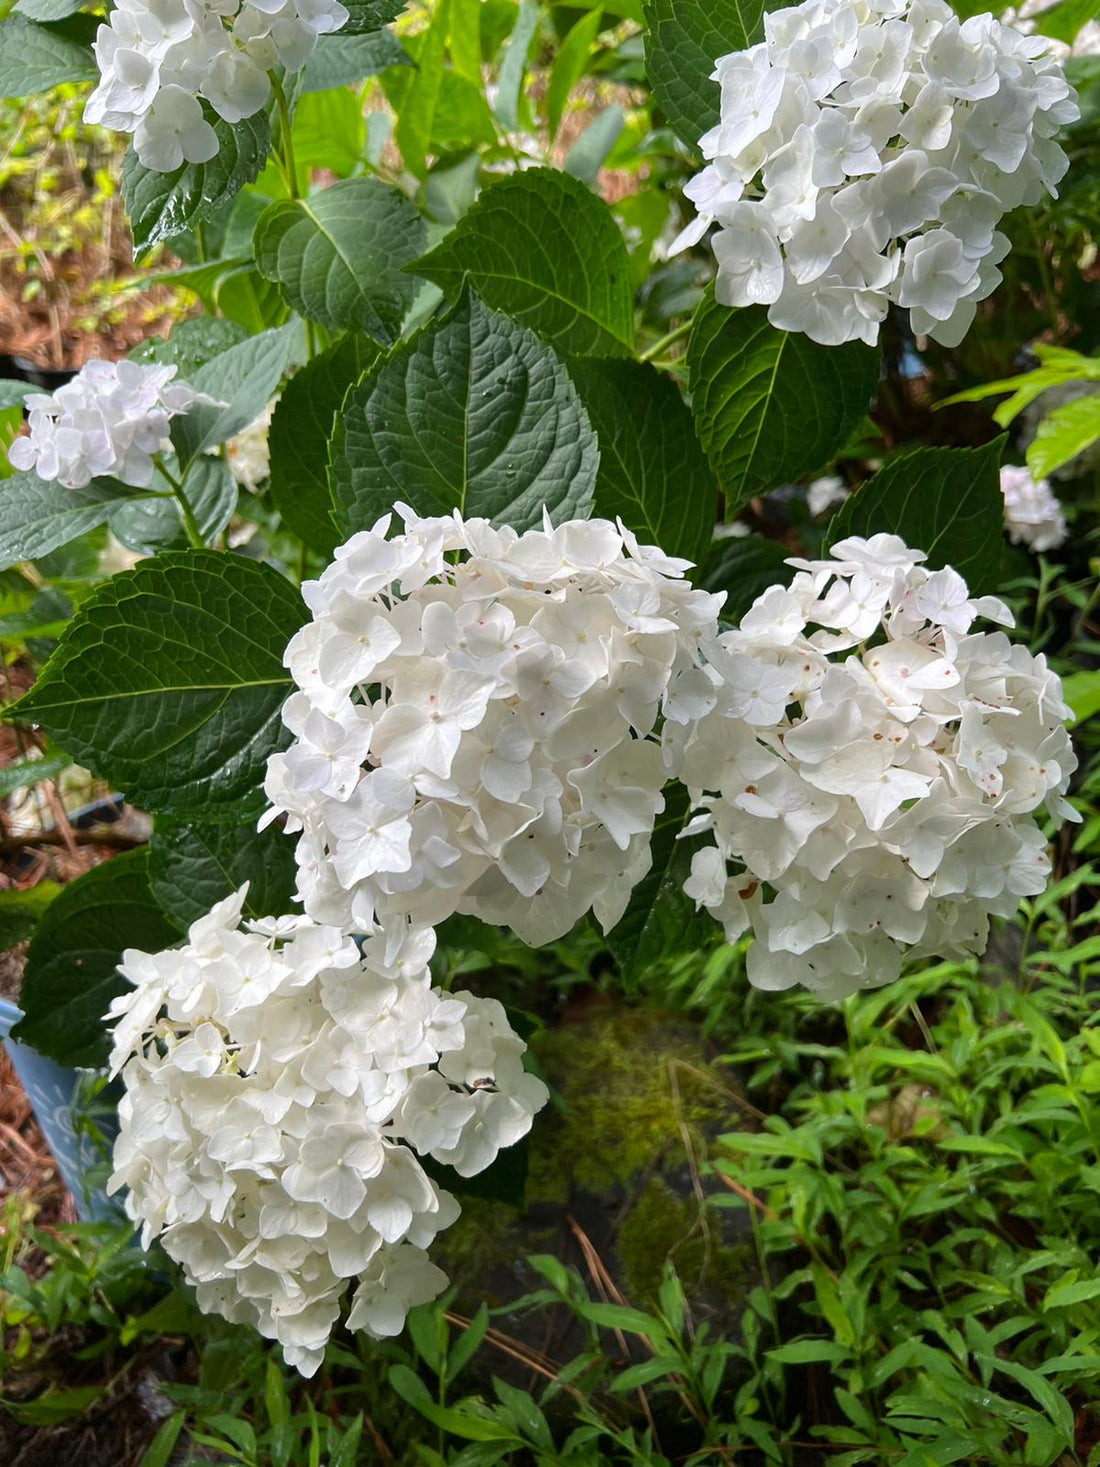 Blushing Bride Endless Summer Hydrangea- Pure White Semi-Double Florets,Which Mature To Blush Pink Or Carolina Blue, Depending On Soil Ph